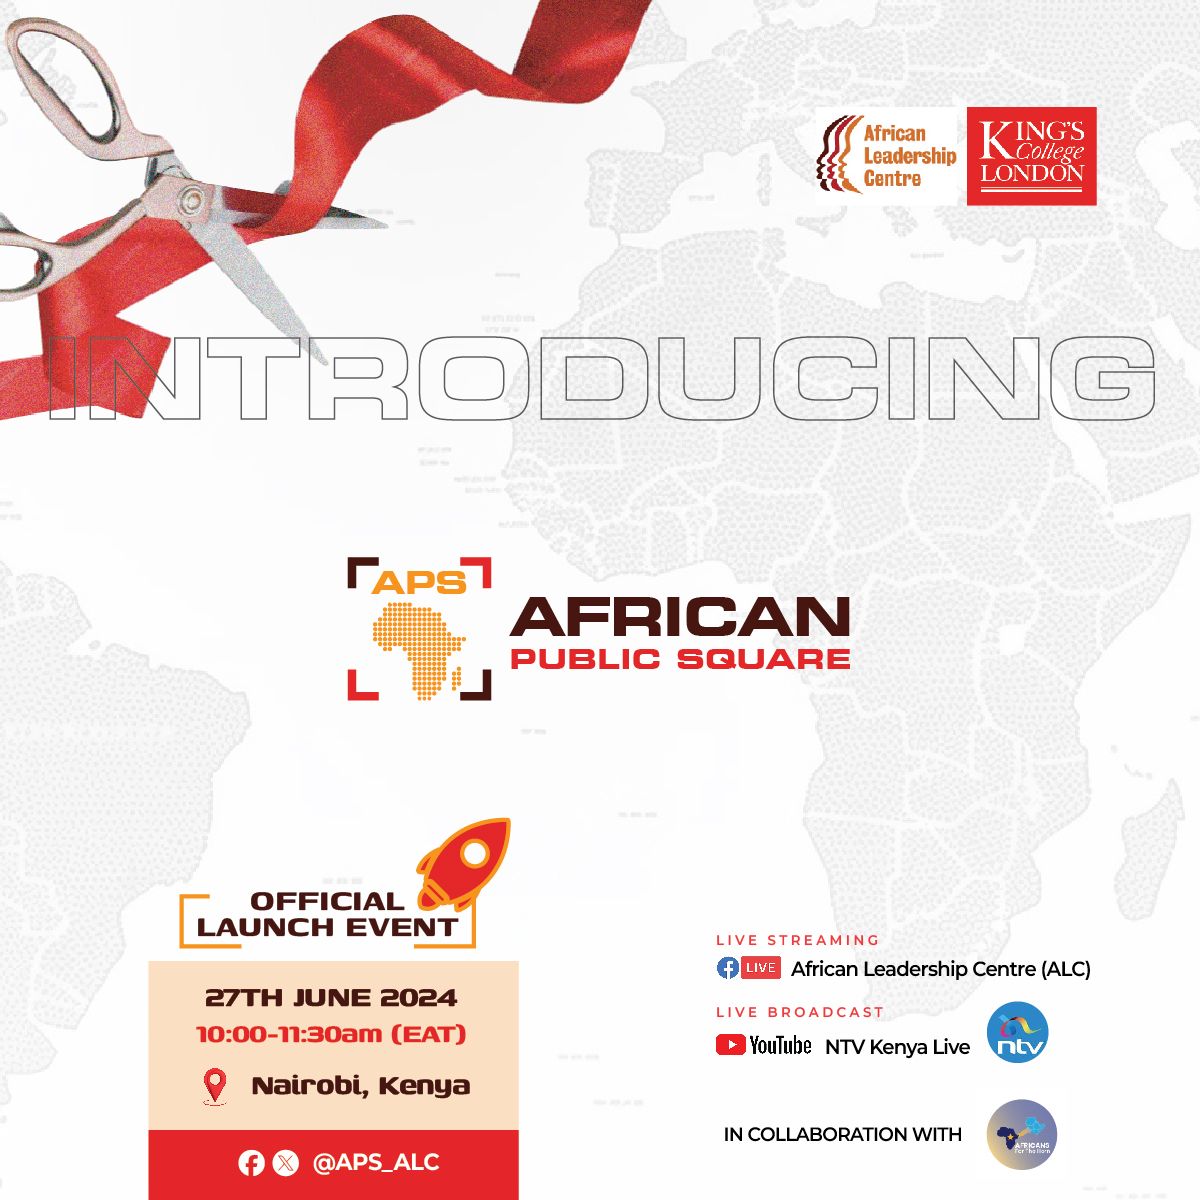 The African Public Square (APS) Launch